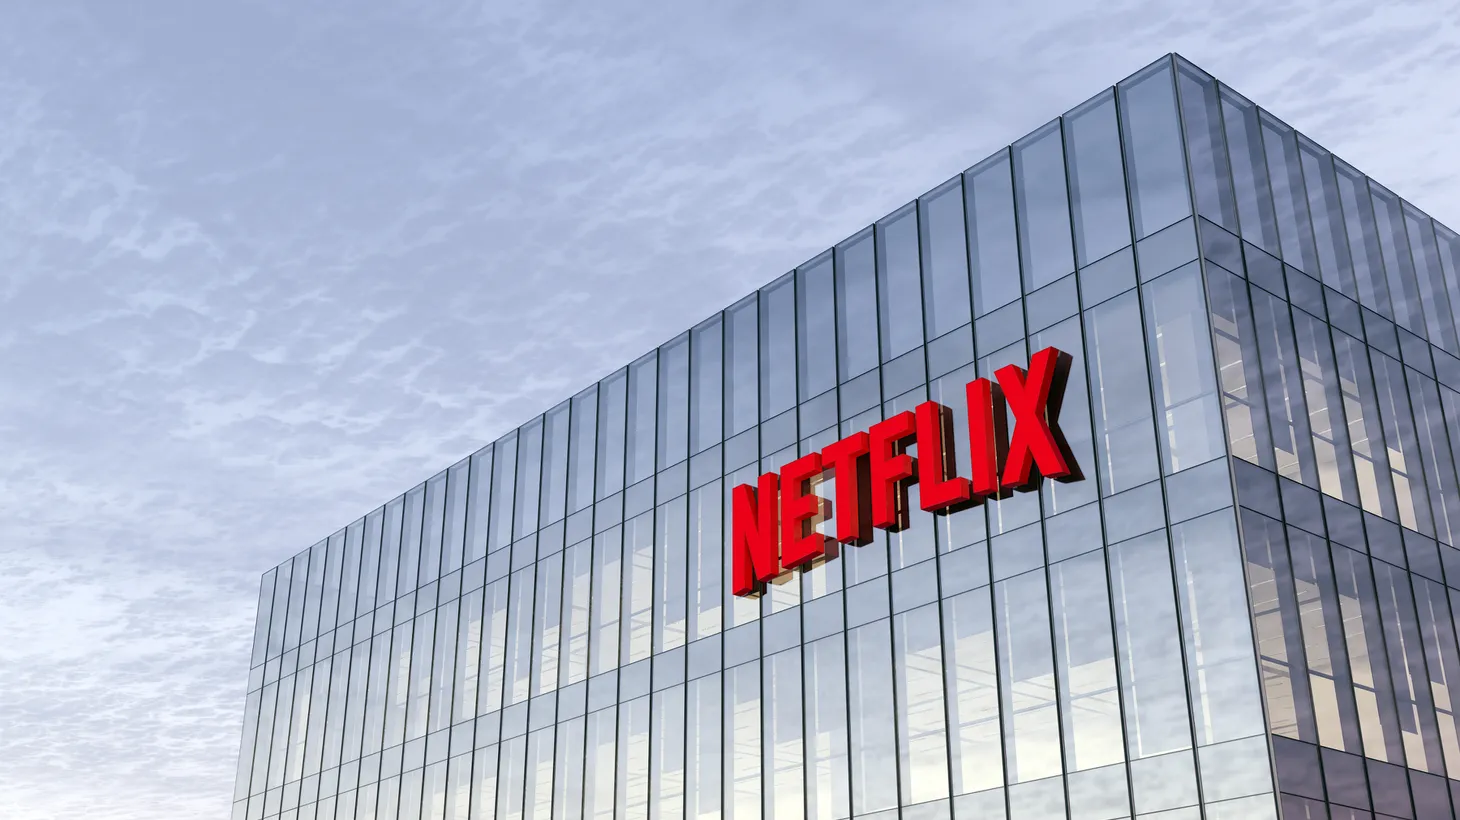 Industry executives reveal that Netflix may be crumbling under poor leadership.